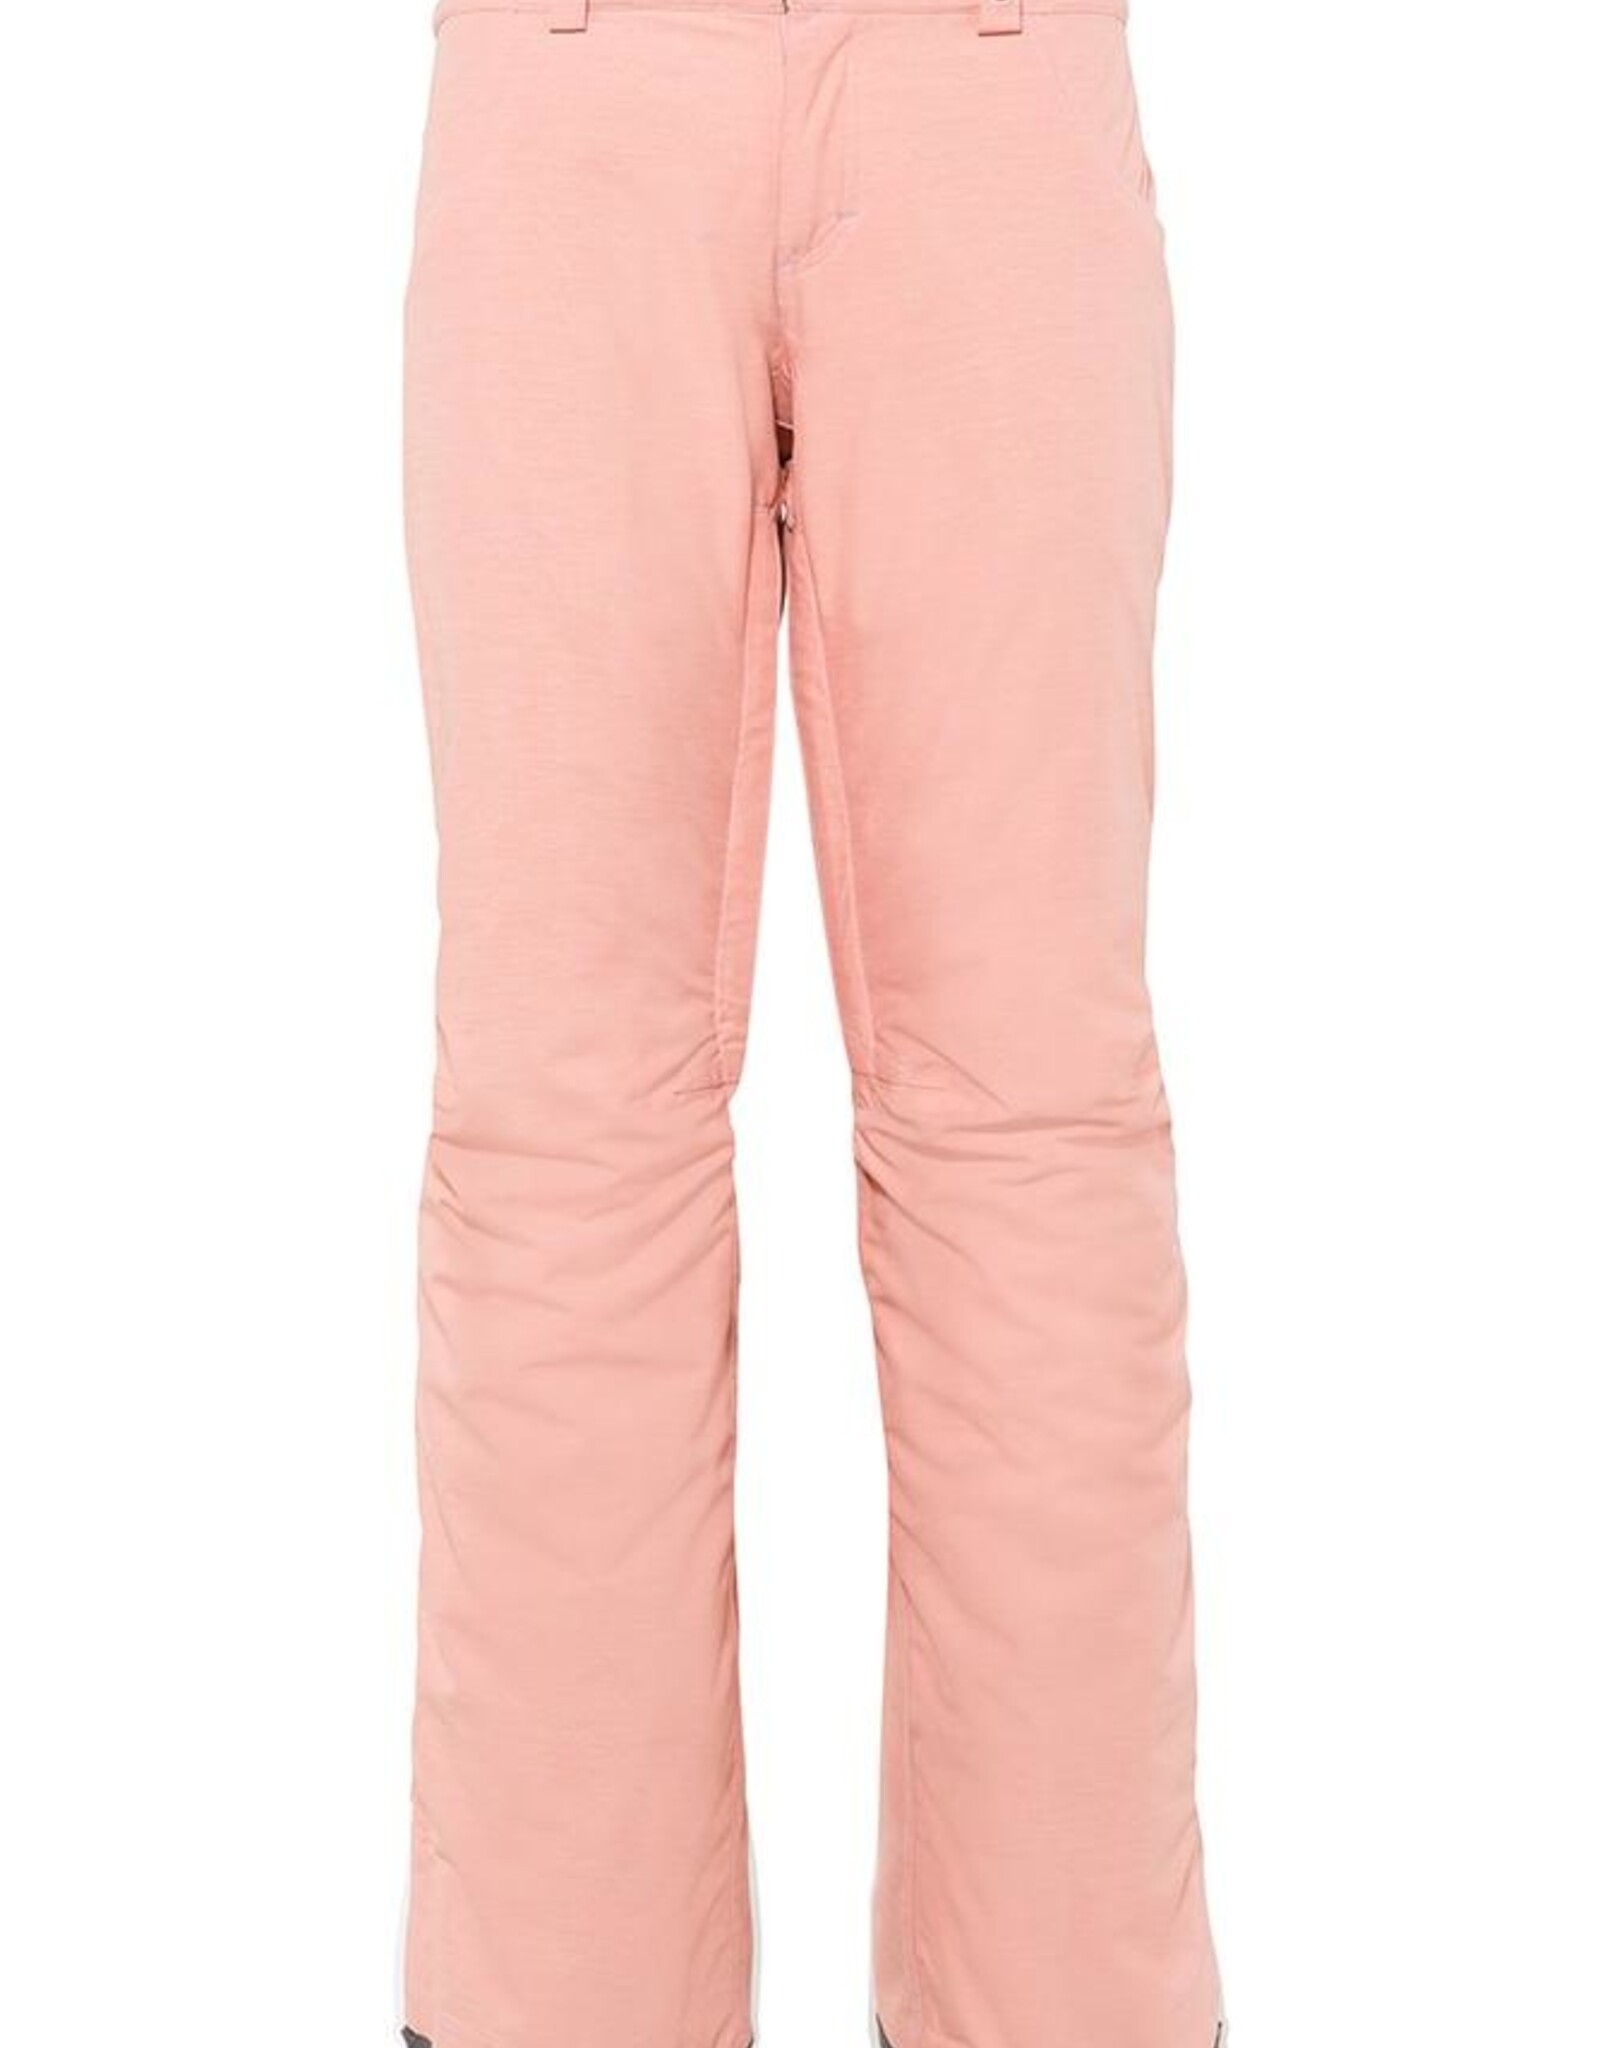 686 OUTERWEAR 686 - MID-RISE PANT - CORAL PINK